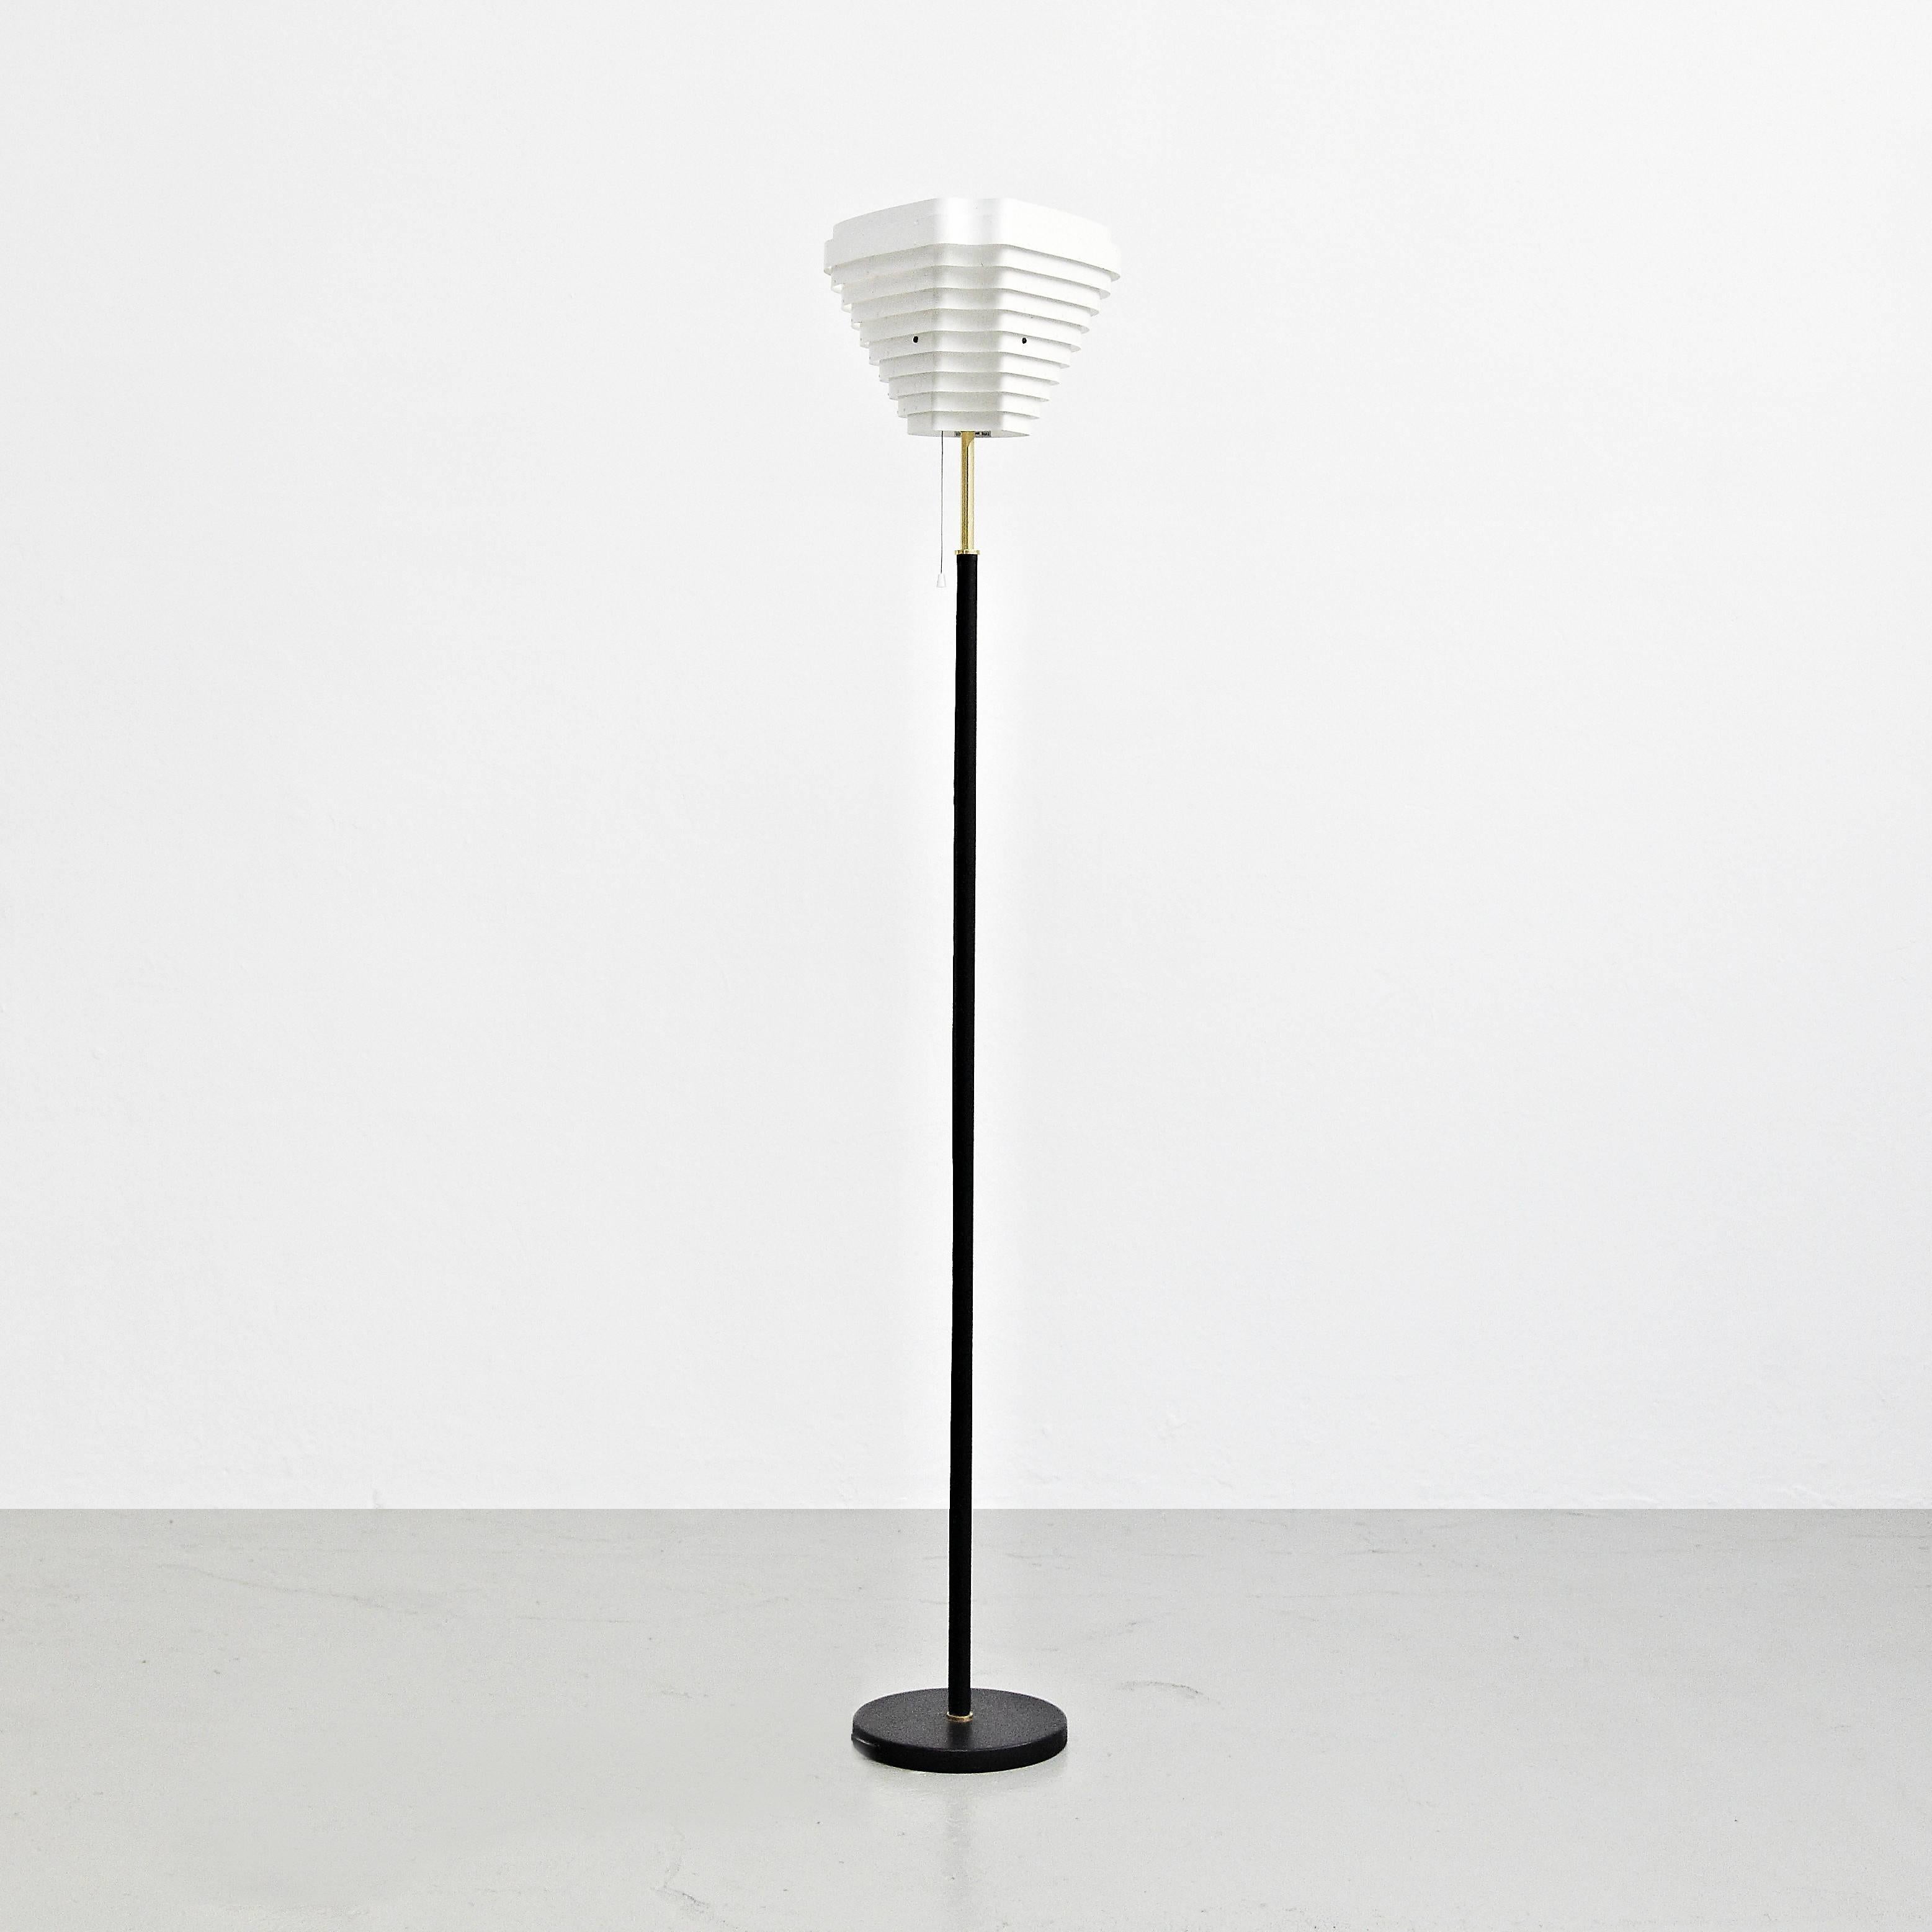 Floor lamp designed by Alvar Aalto manufactured in Finland by Artek, circa 1960.

White enameled metal, vented roughly conical shade on a black leather sleeved brass shaft.

In great original condition, with minor wear consistent with age and